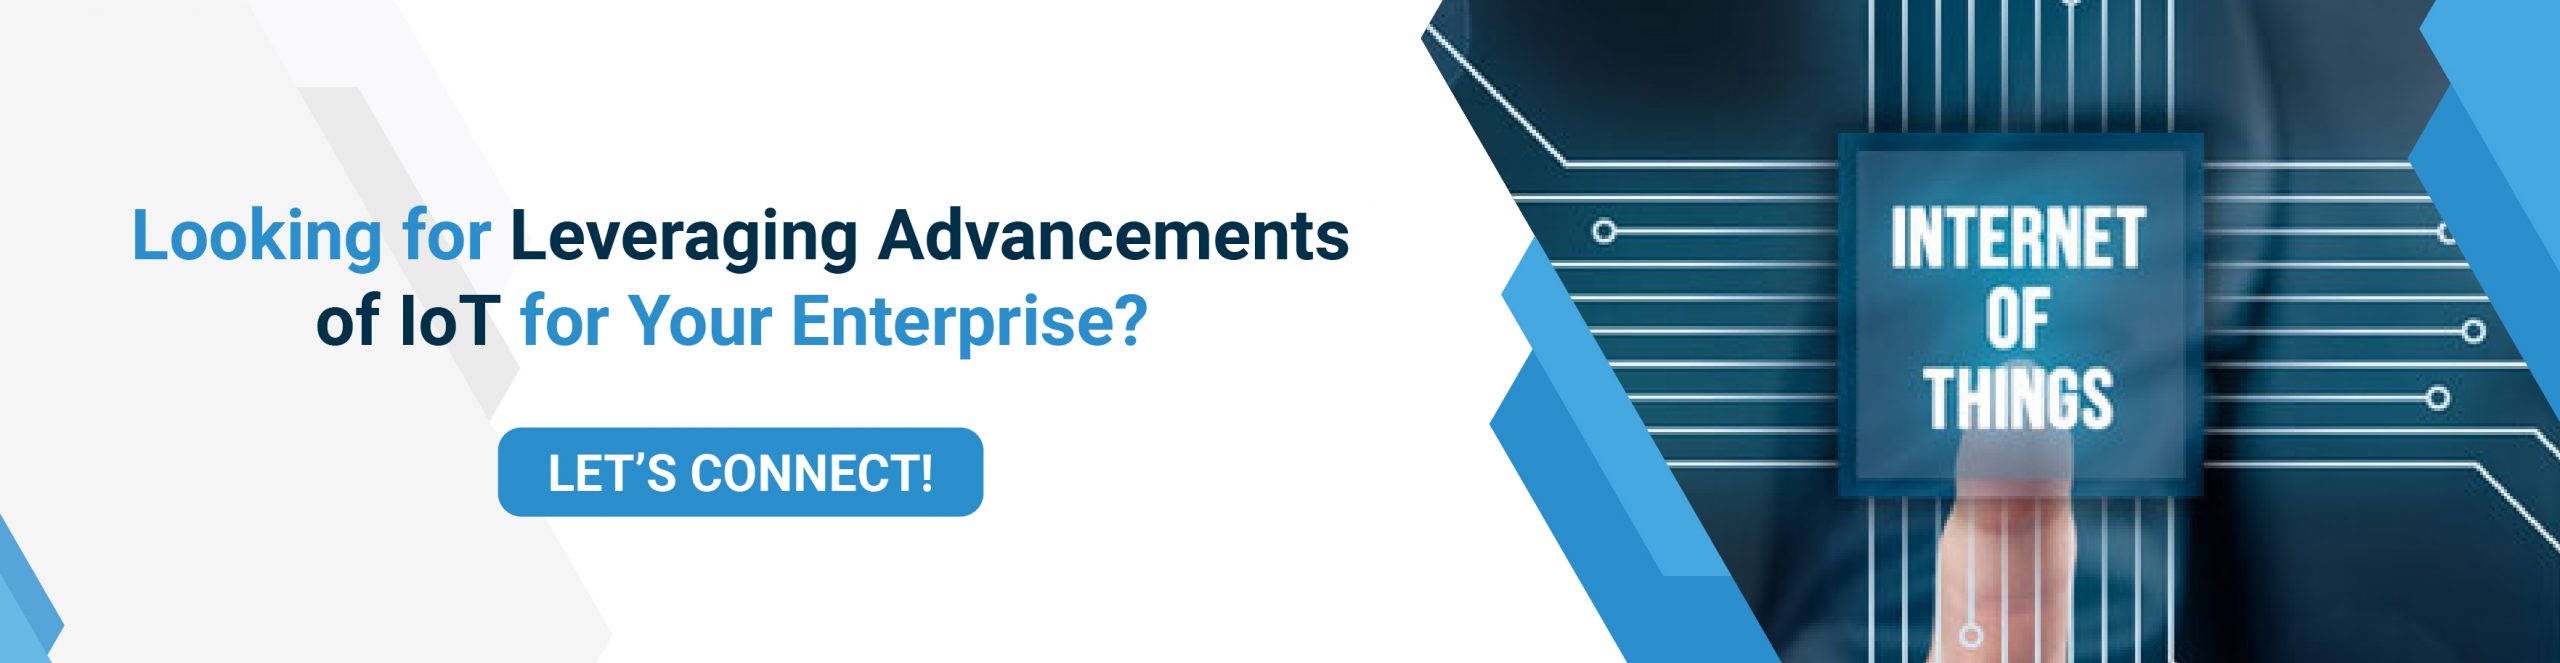 Looking for Leveraging Advancements of IoT for Your Enterprise?